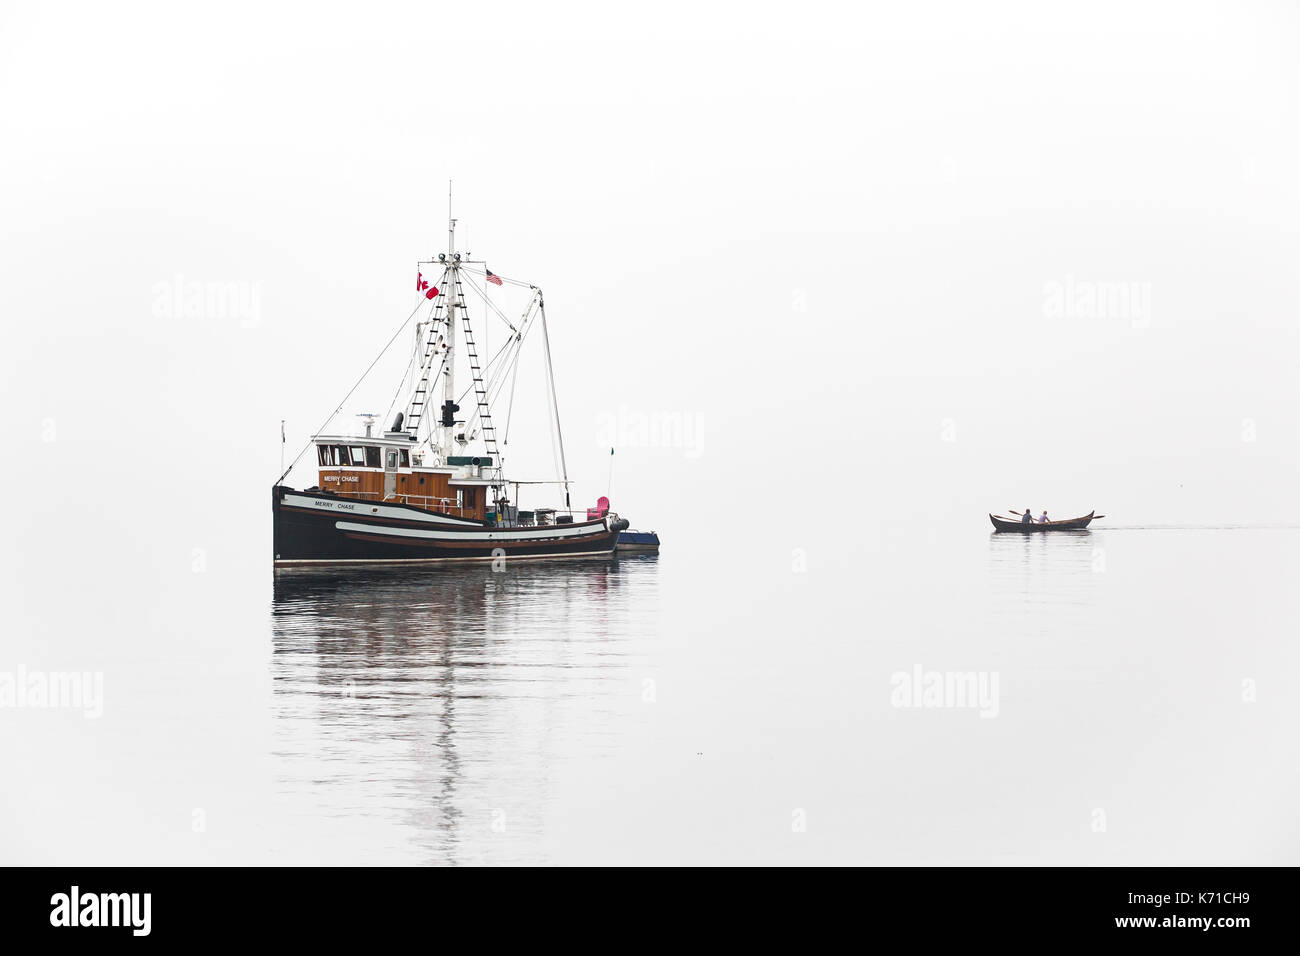 Fishing boat near Port Townsend during Wooden Boat Show in fog with row boat. Stock Photo